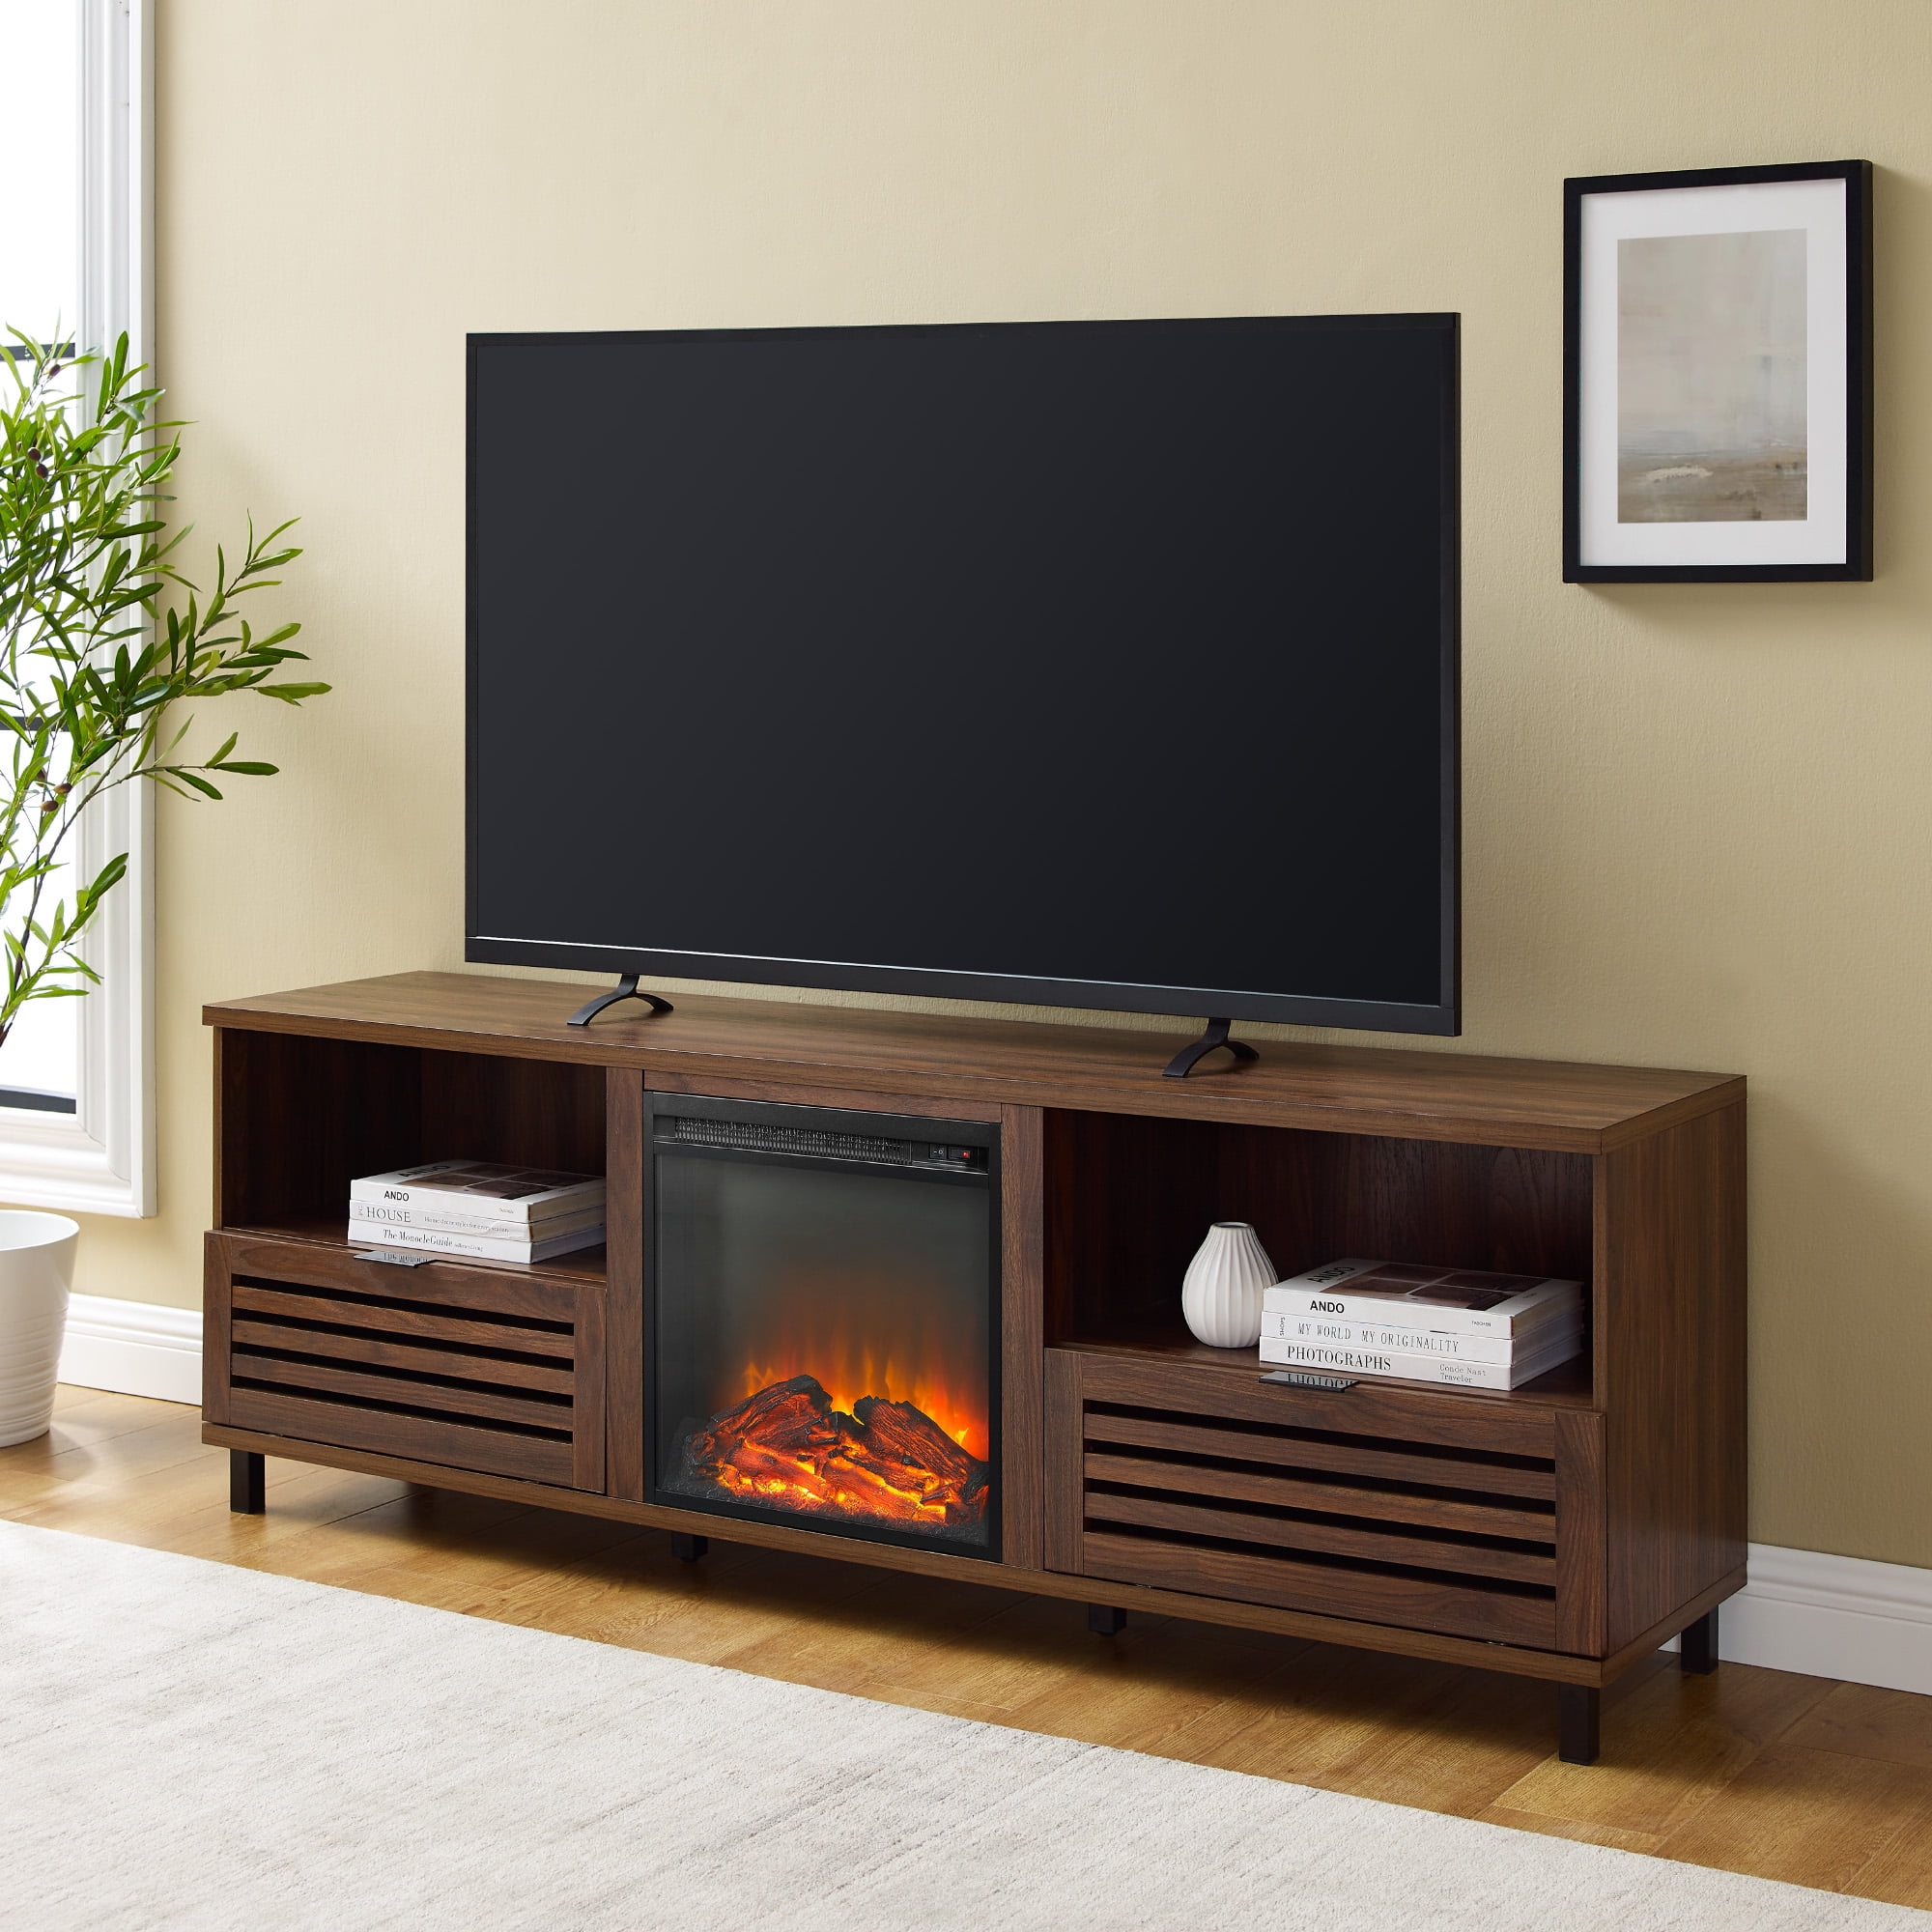 Manor Park Industrial Fireplace TV Stand for TVs up to 80